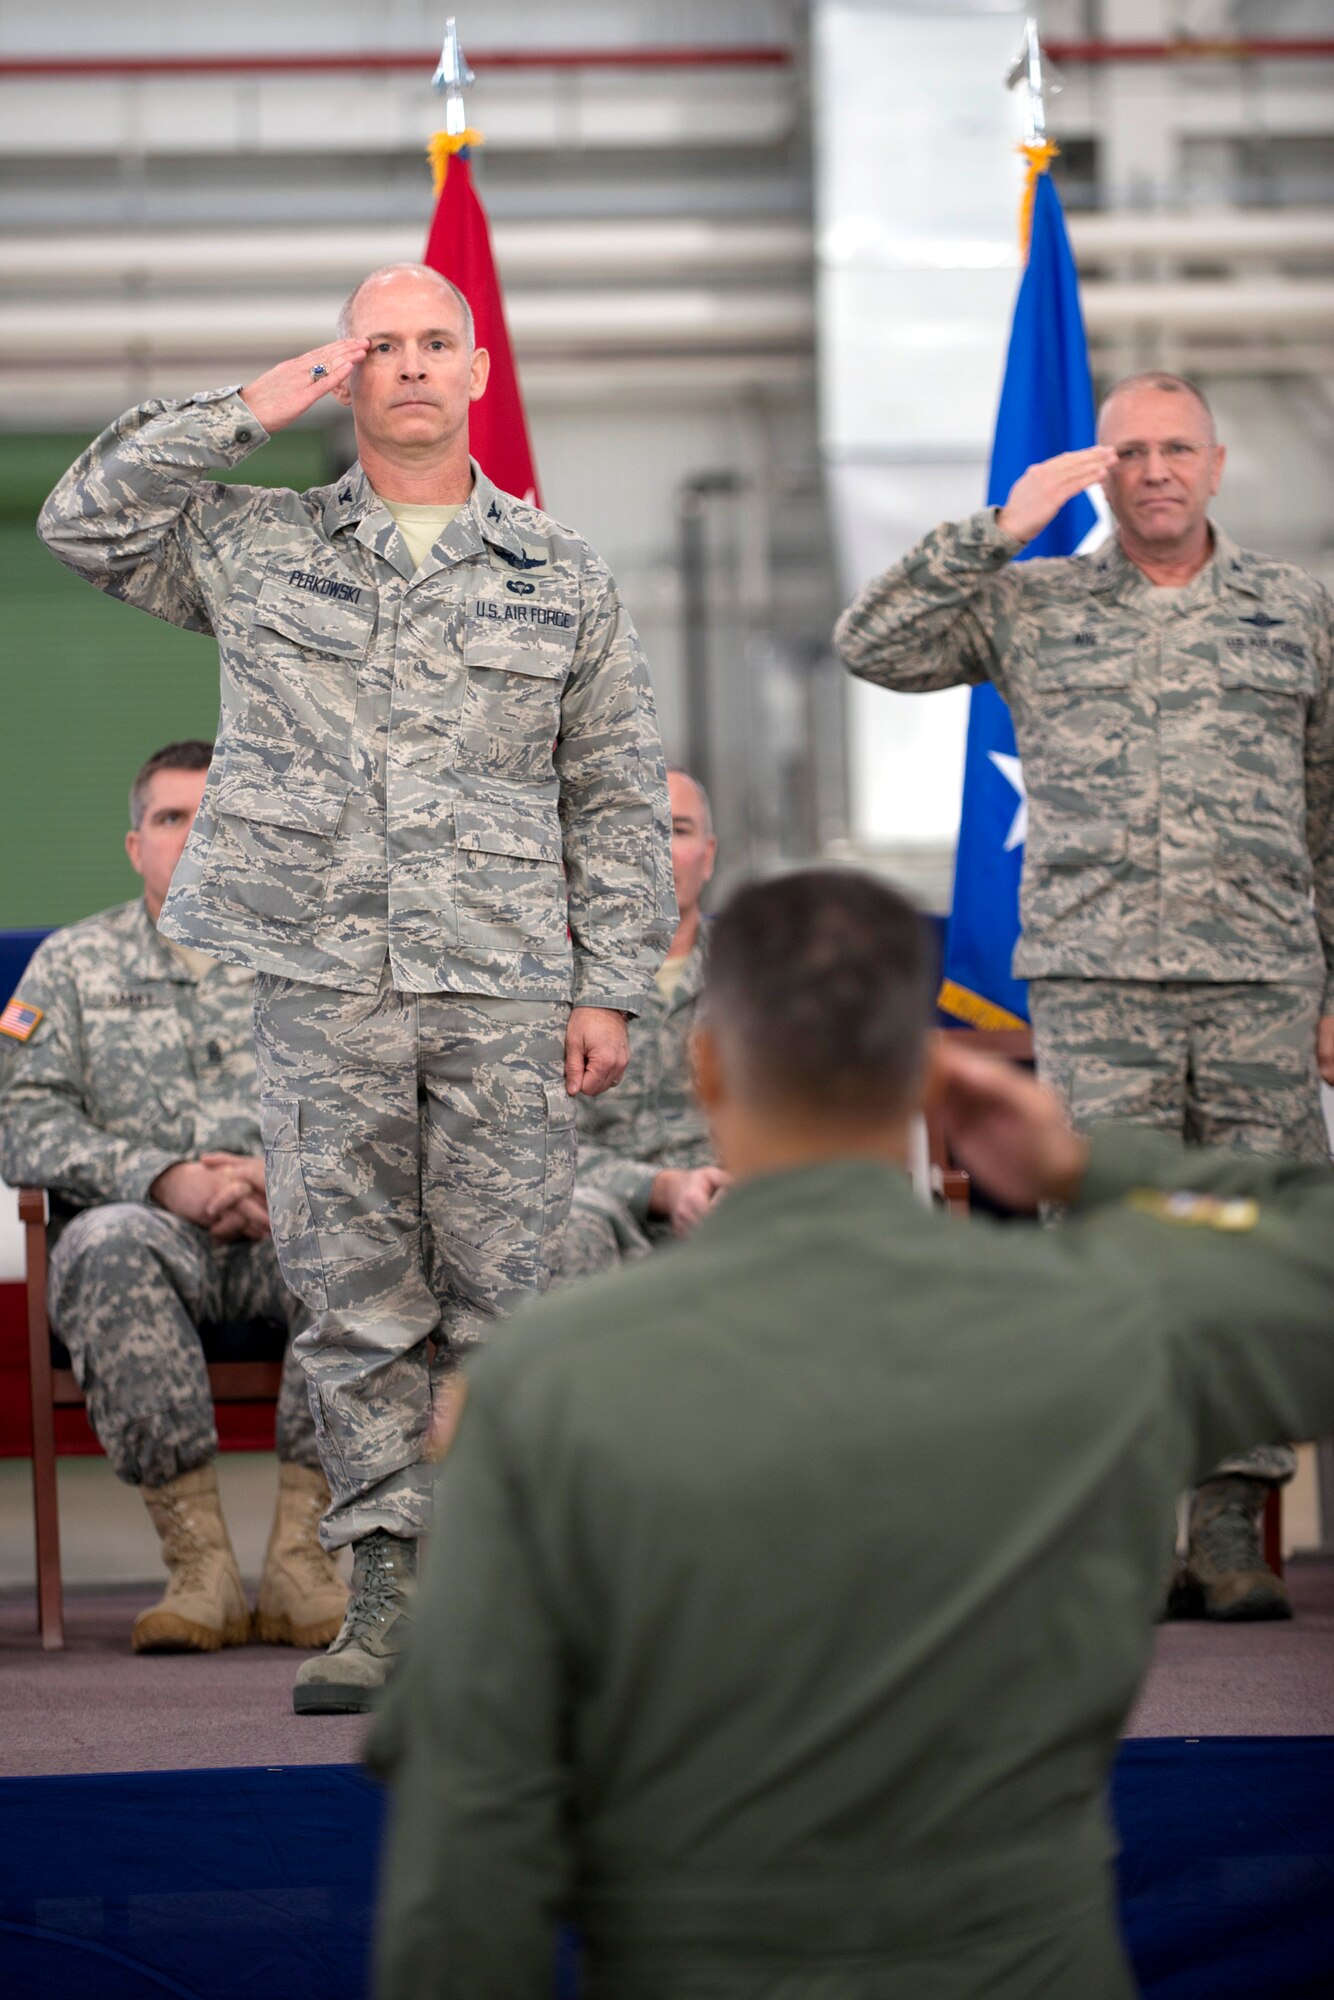 Col. Shaun Perkowski, left, incoming commander for the 167th Airlift Wing, renders his first official salute as commander during the change of command ceremony, Nov. 15. Outgoing commander, Col. Roger Nye, right, is retiring after 35 years of service, the last six of which he served as commander of the 167AW. (Air National Guard photo by: Master Sgt. Emily Beightol-Deyerle)